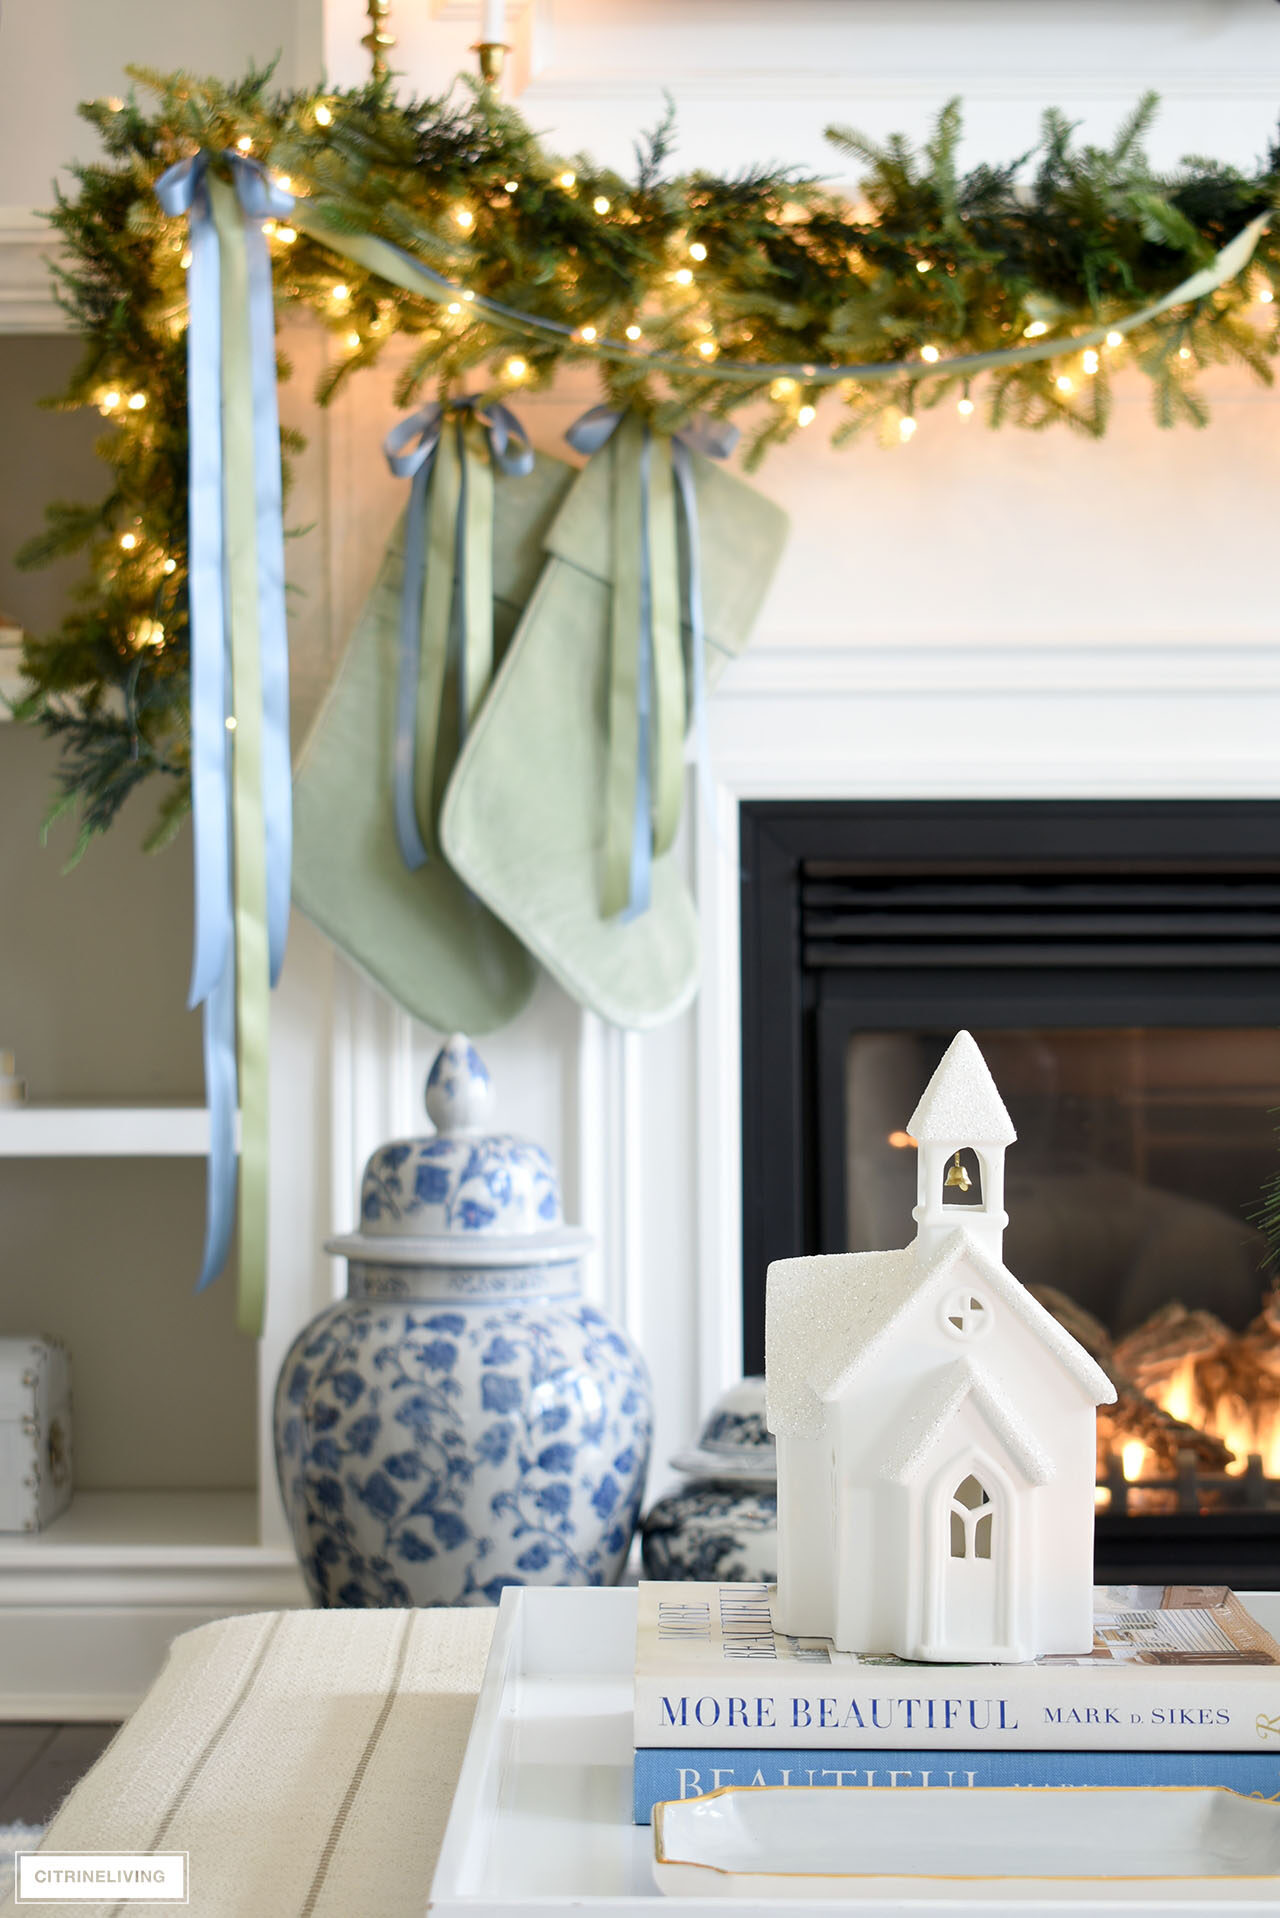 Blue and green Christmas decor, coffee table styling with a white ceramic church, and Christmas mantel with green stockings in the background.